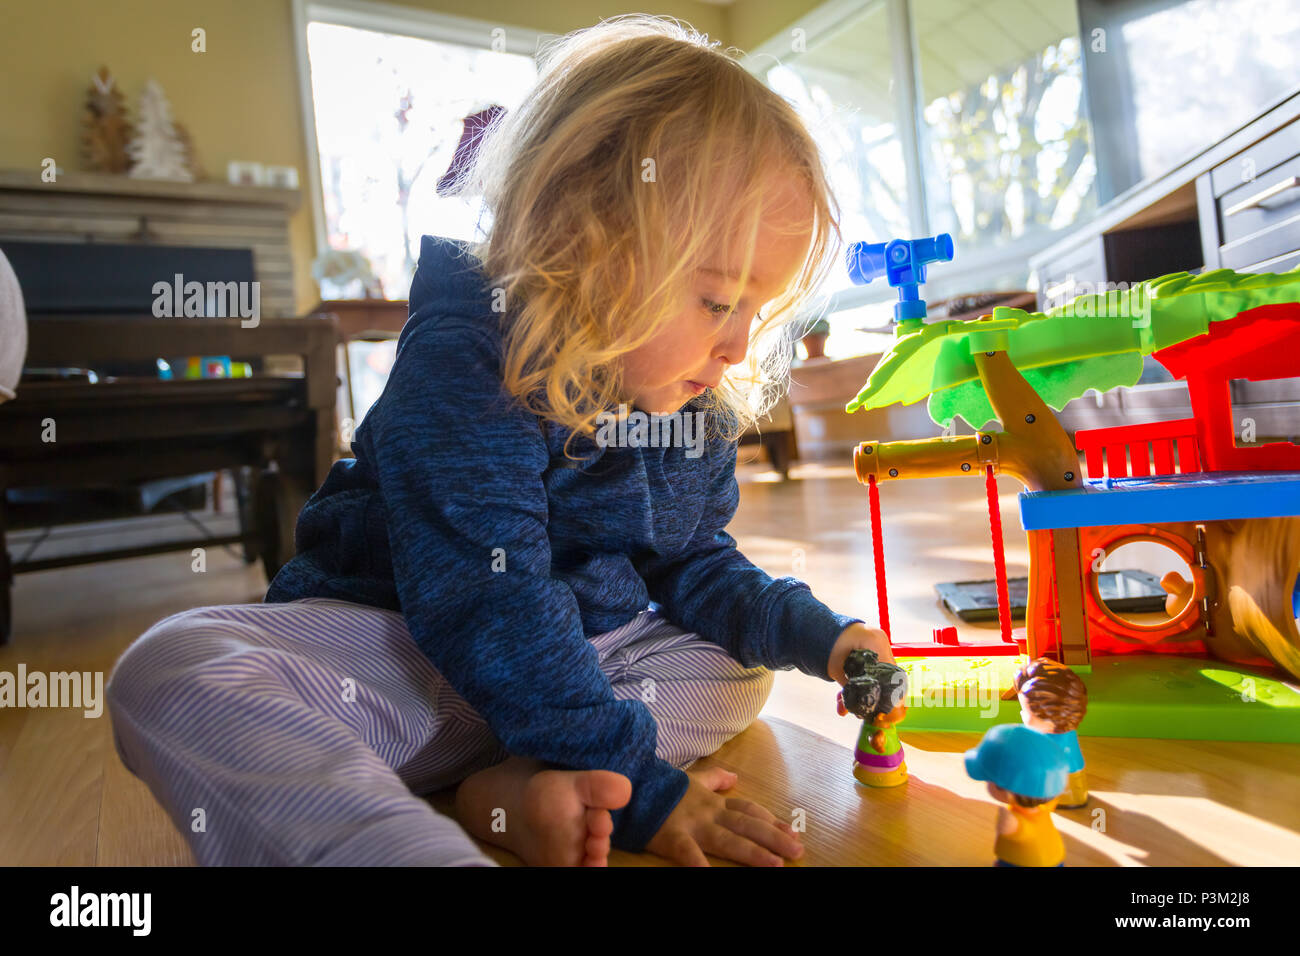 2 year old girl playing with dolls Stock Photo